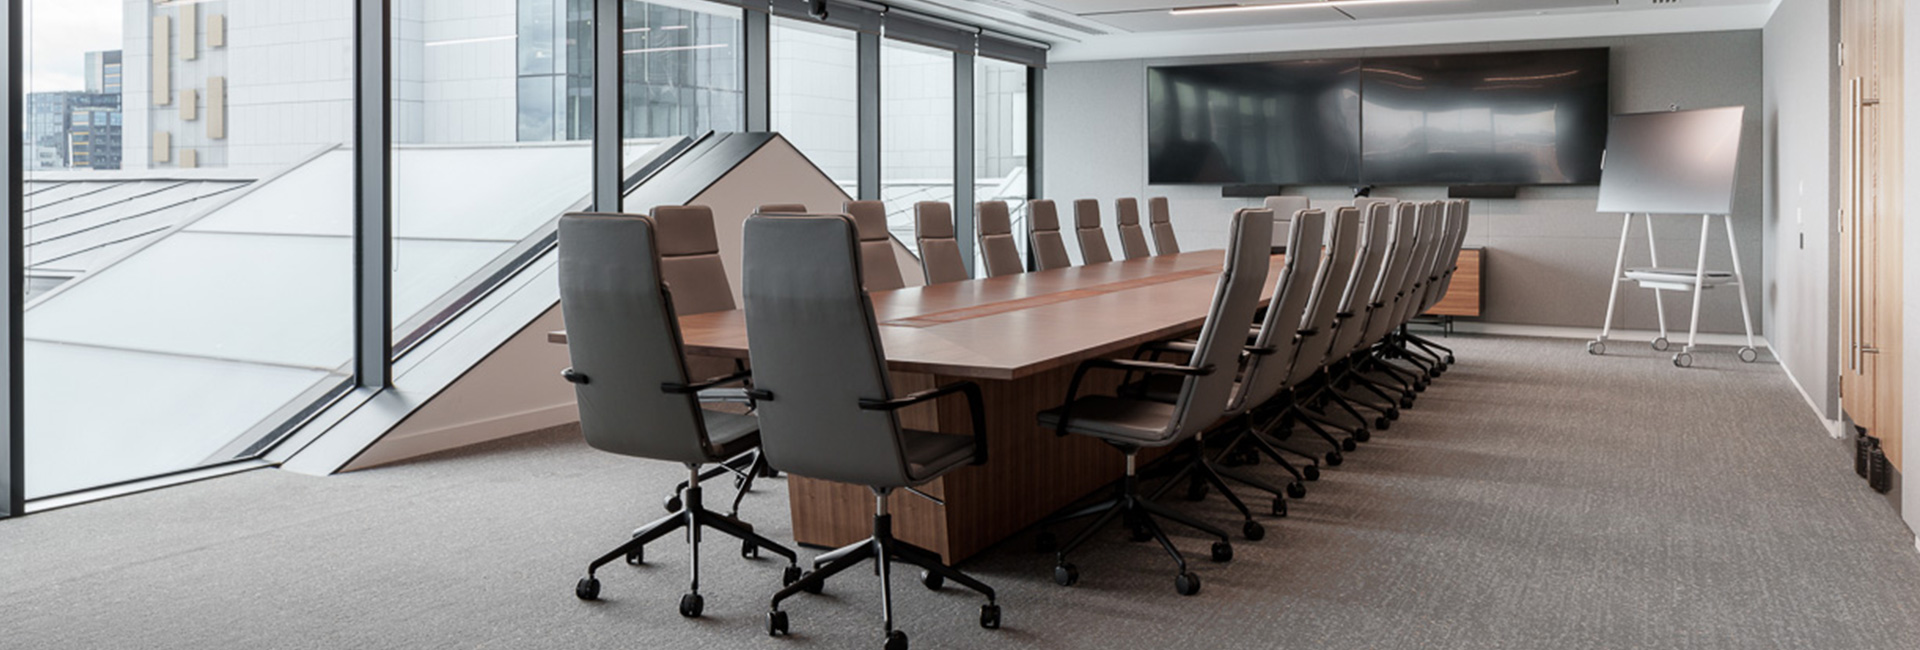 Interior view of conference room inside Fiserv